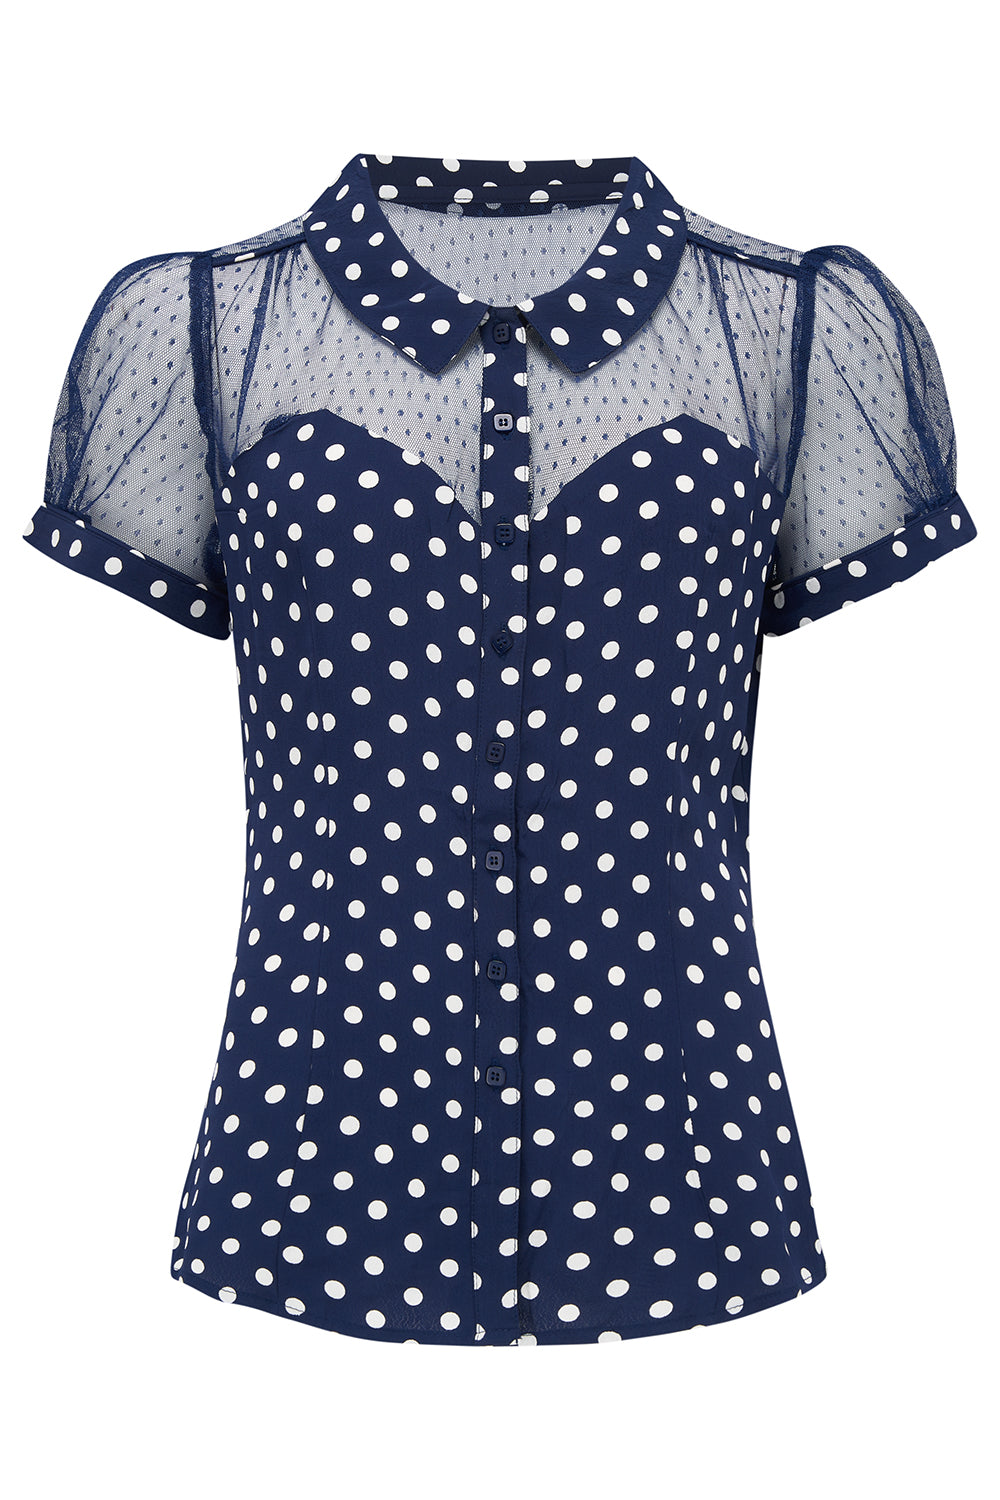 "Florance" Evening Blouse in Navy Polka with Net, Authentic 1940s Vintage Style - True and authentic vintage style clothing, inspired by the Classic styles of CC41 , WW2 and the fun 1950s RocknRoll era, for everyday wear plus events like Goodwood Revival, Twinwood Festival and Viva Las Vegas Rockabilly Weekend Rock n Romance The Seamstress Of Bloomsbury